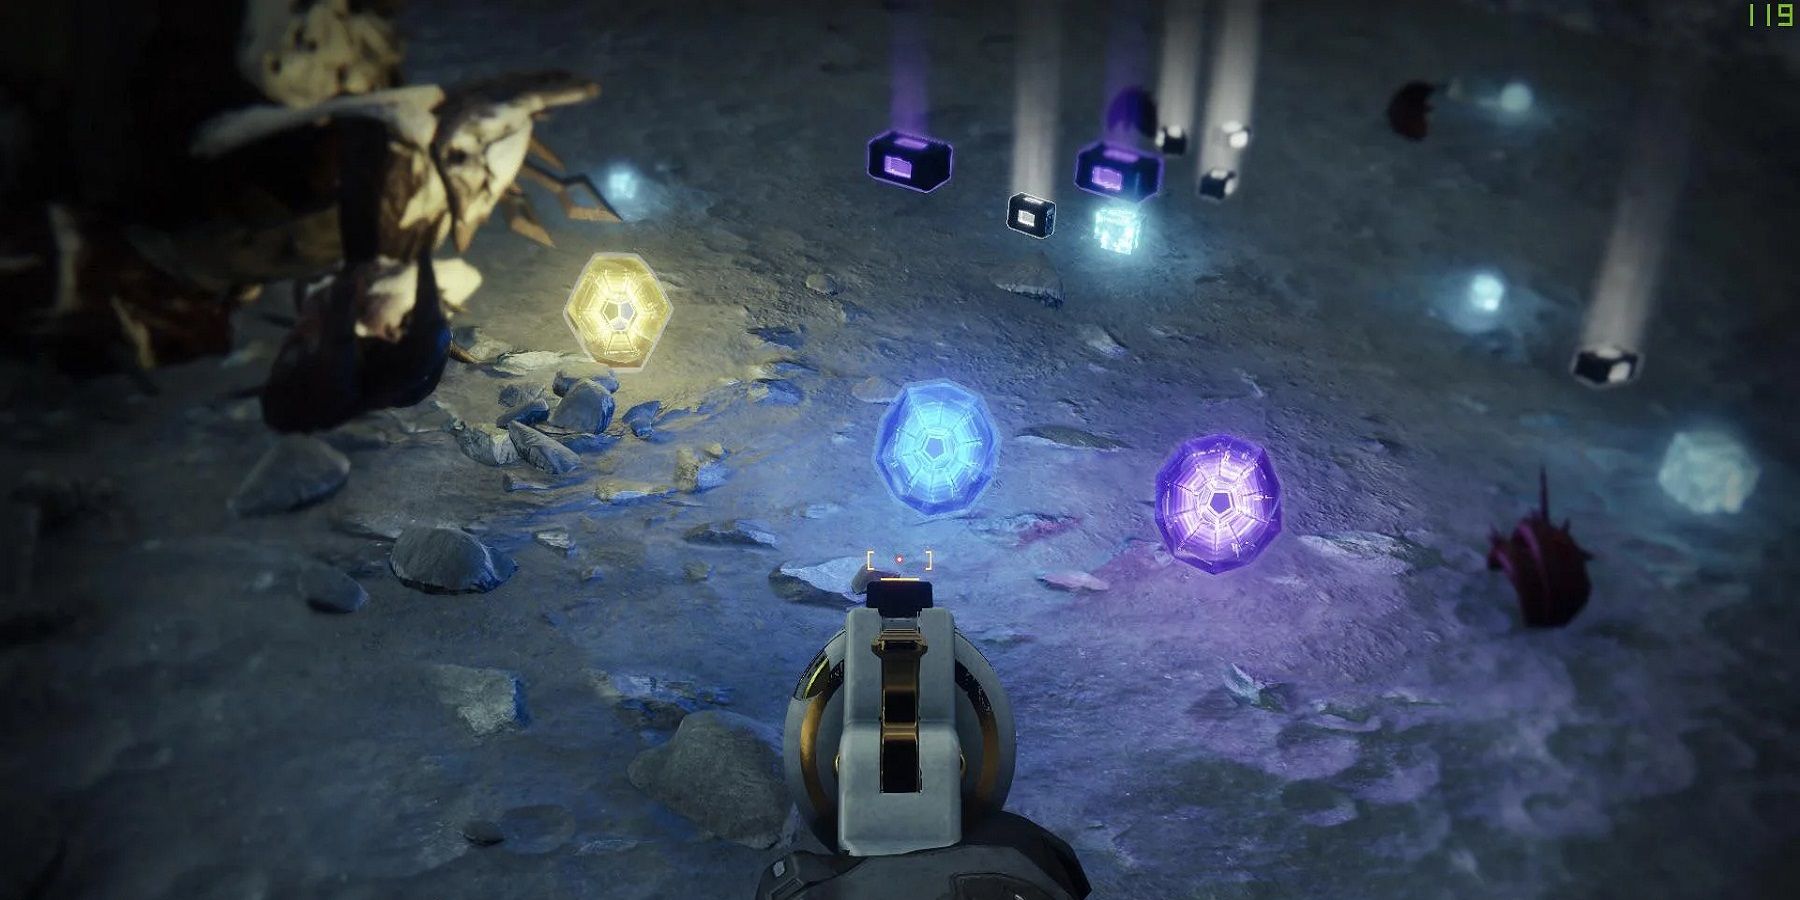 Bungie is bringing changes to Destiny 2's blue engram drops the game's community has been asking a long time for.